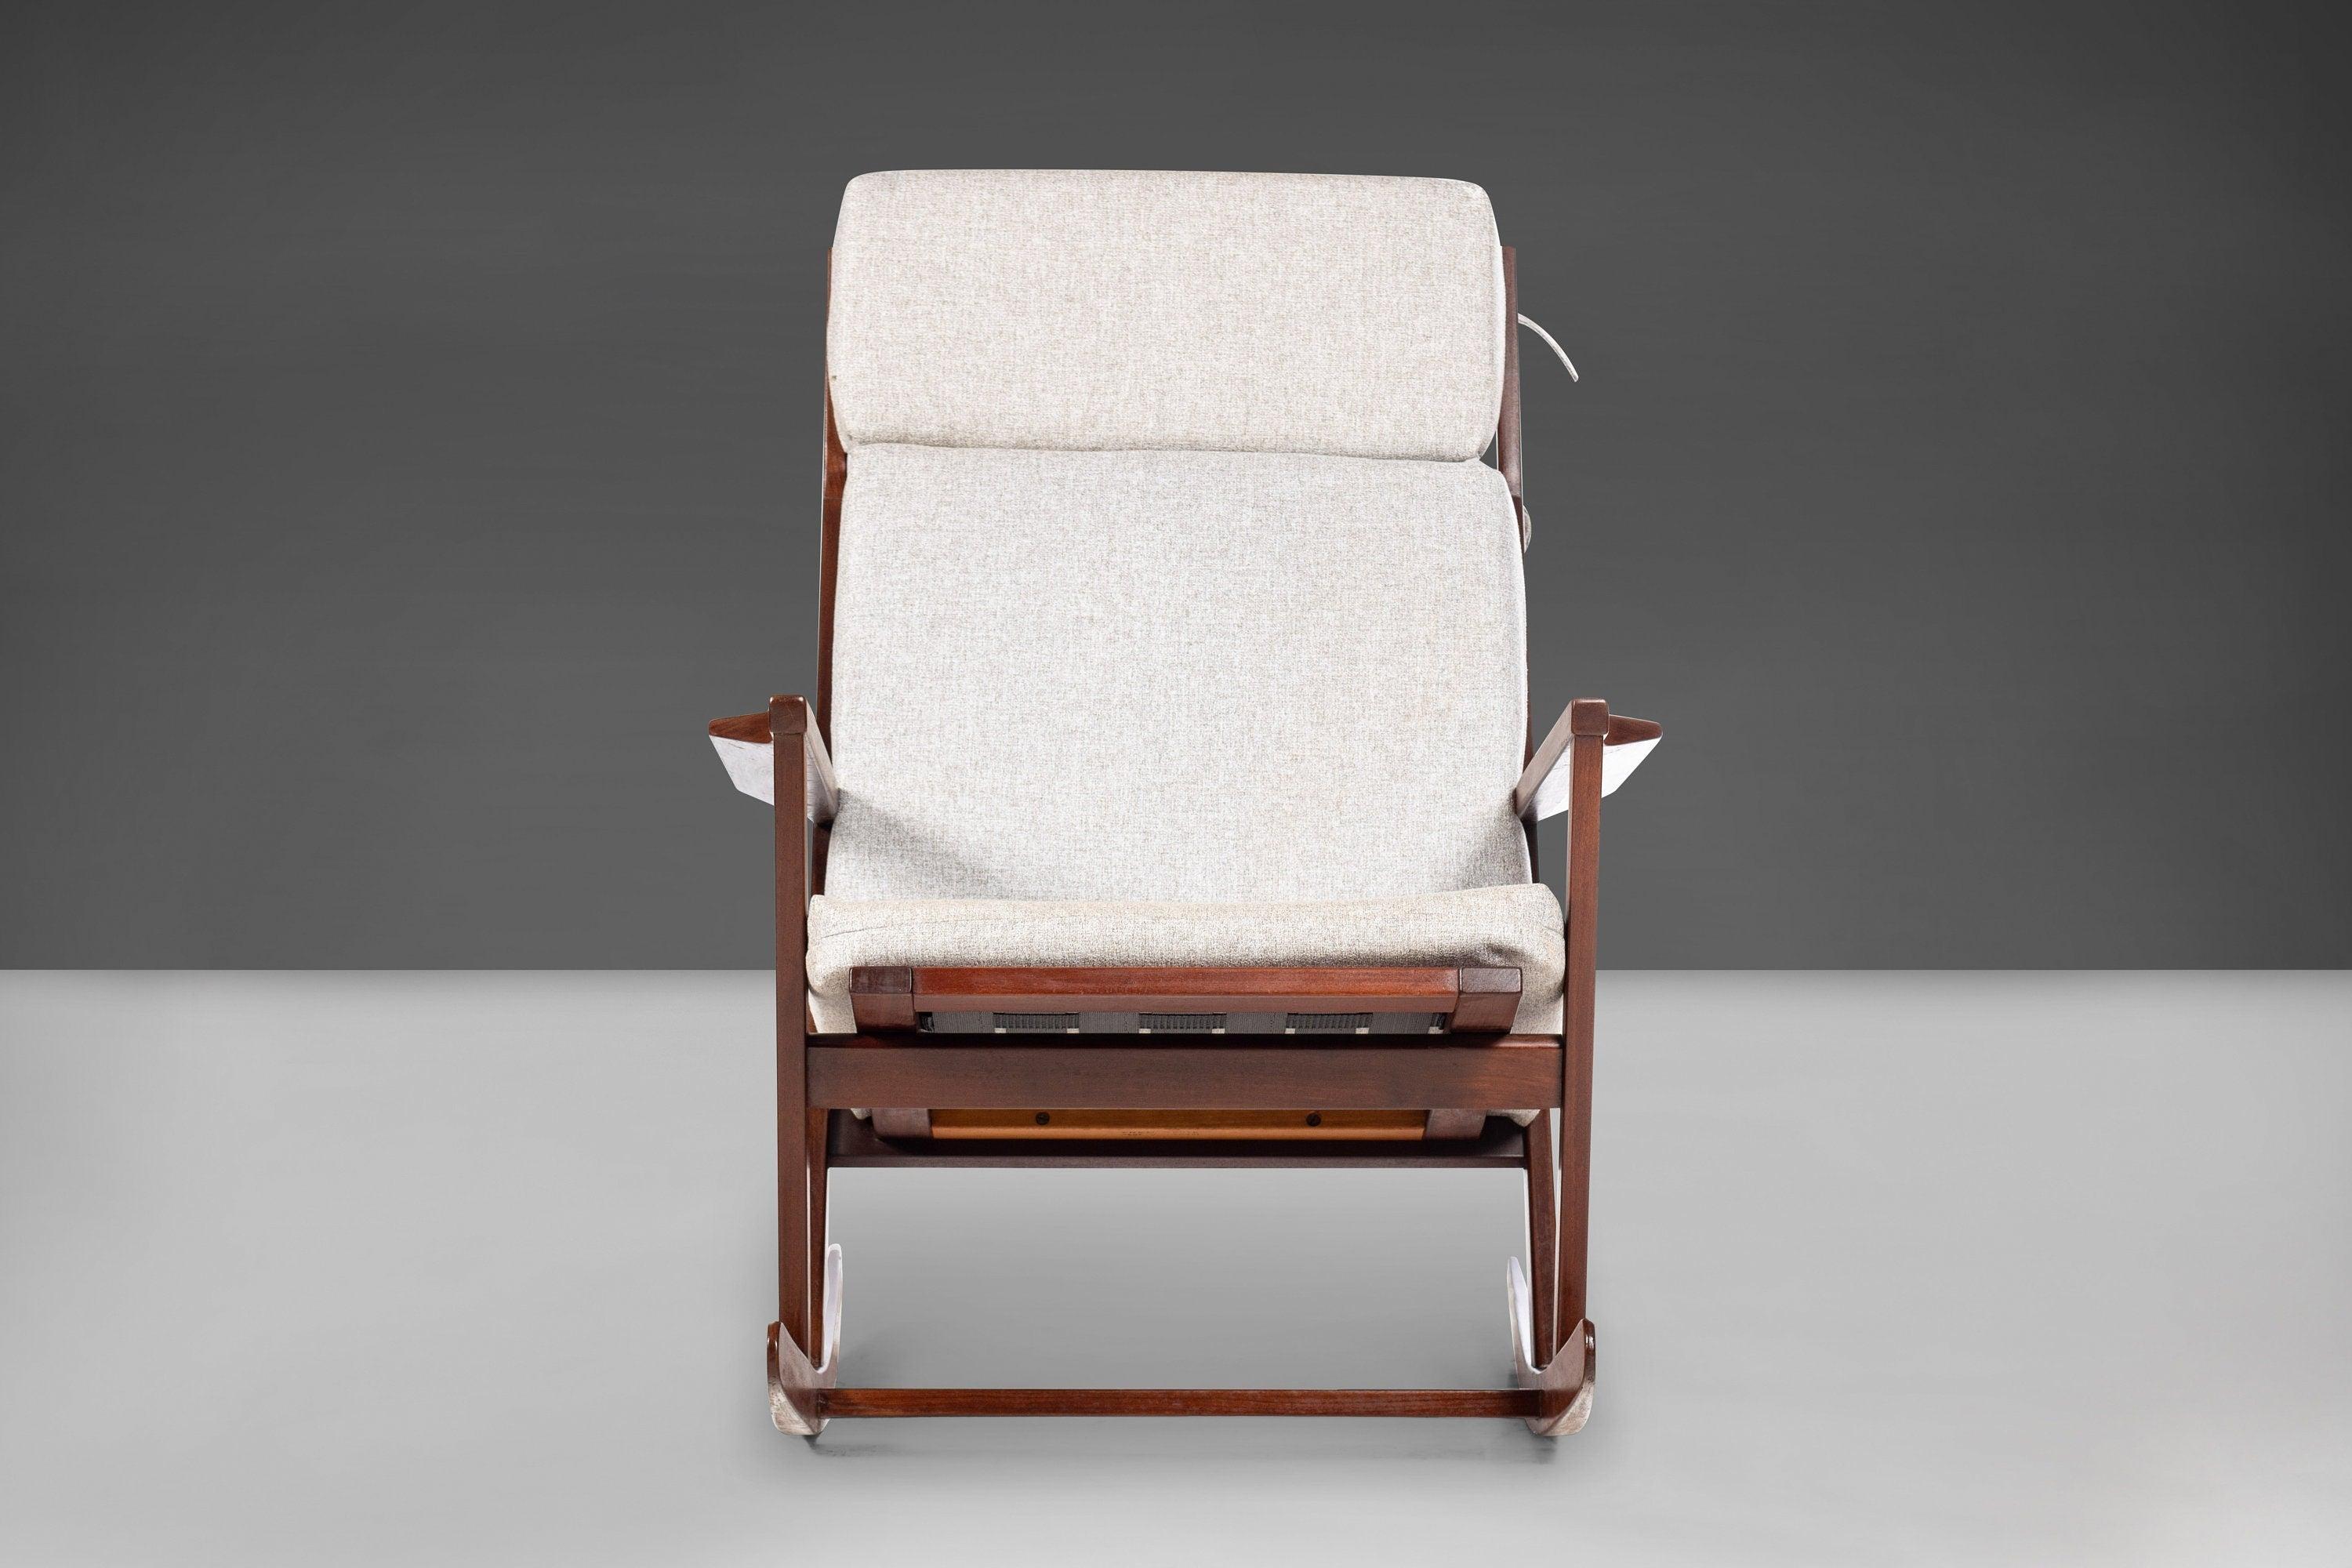 Rocking Chair by Poul Volther for Frem Rojle in Afromosia, New Fabric, c. 1960s In Good Condition For Sale In Deland, FL